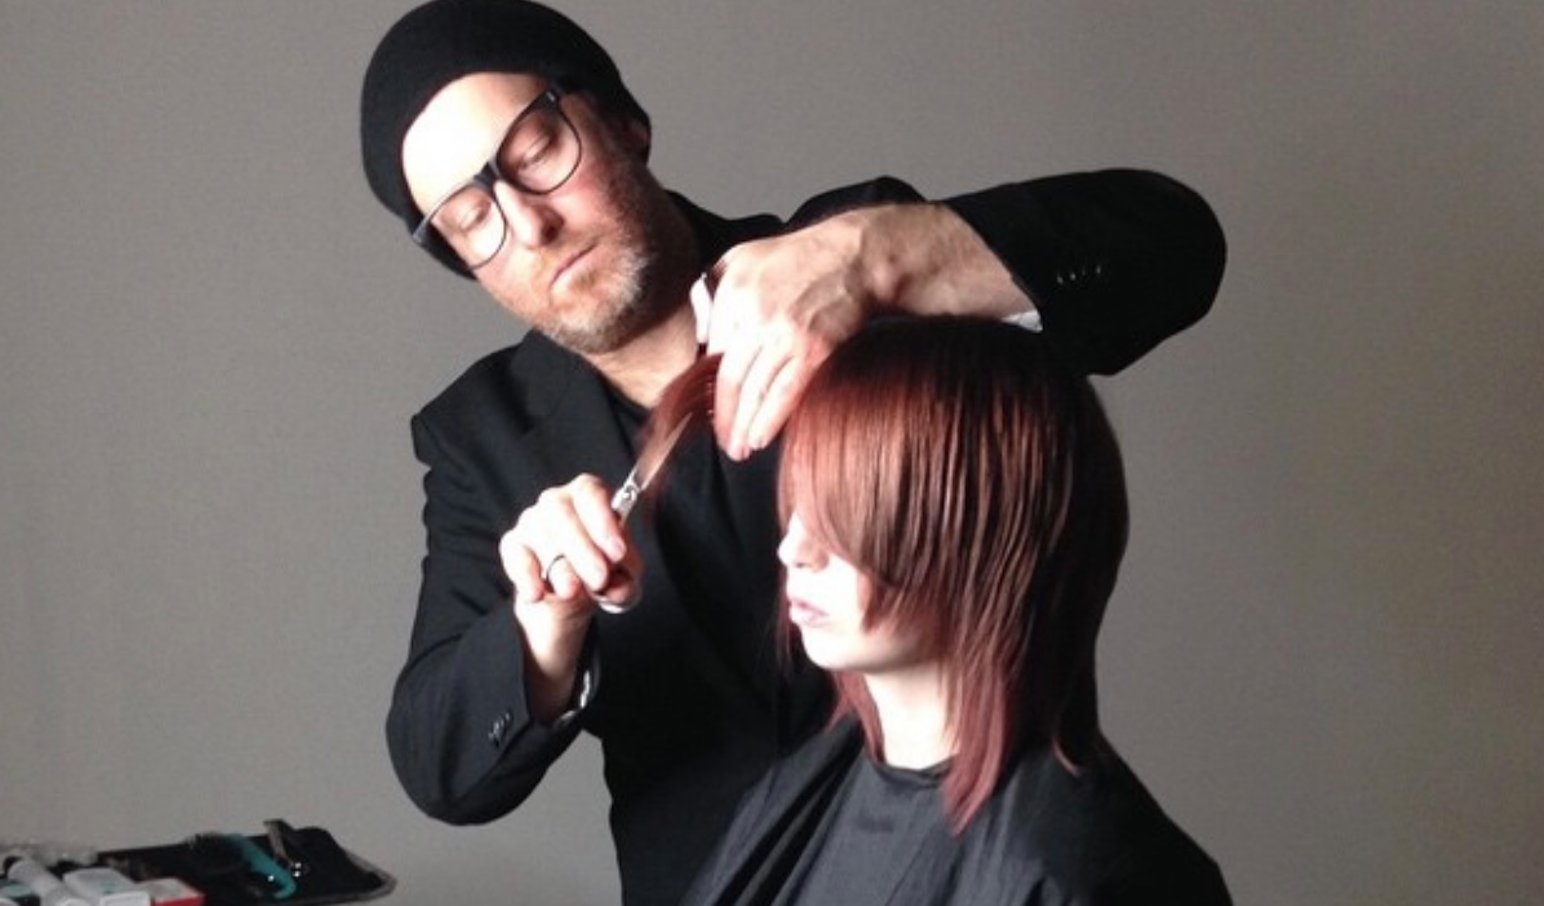 Stylist Charlie Prices cuts a models hair